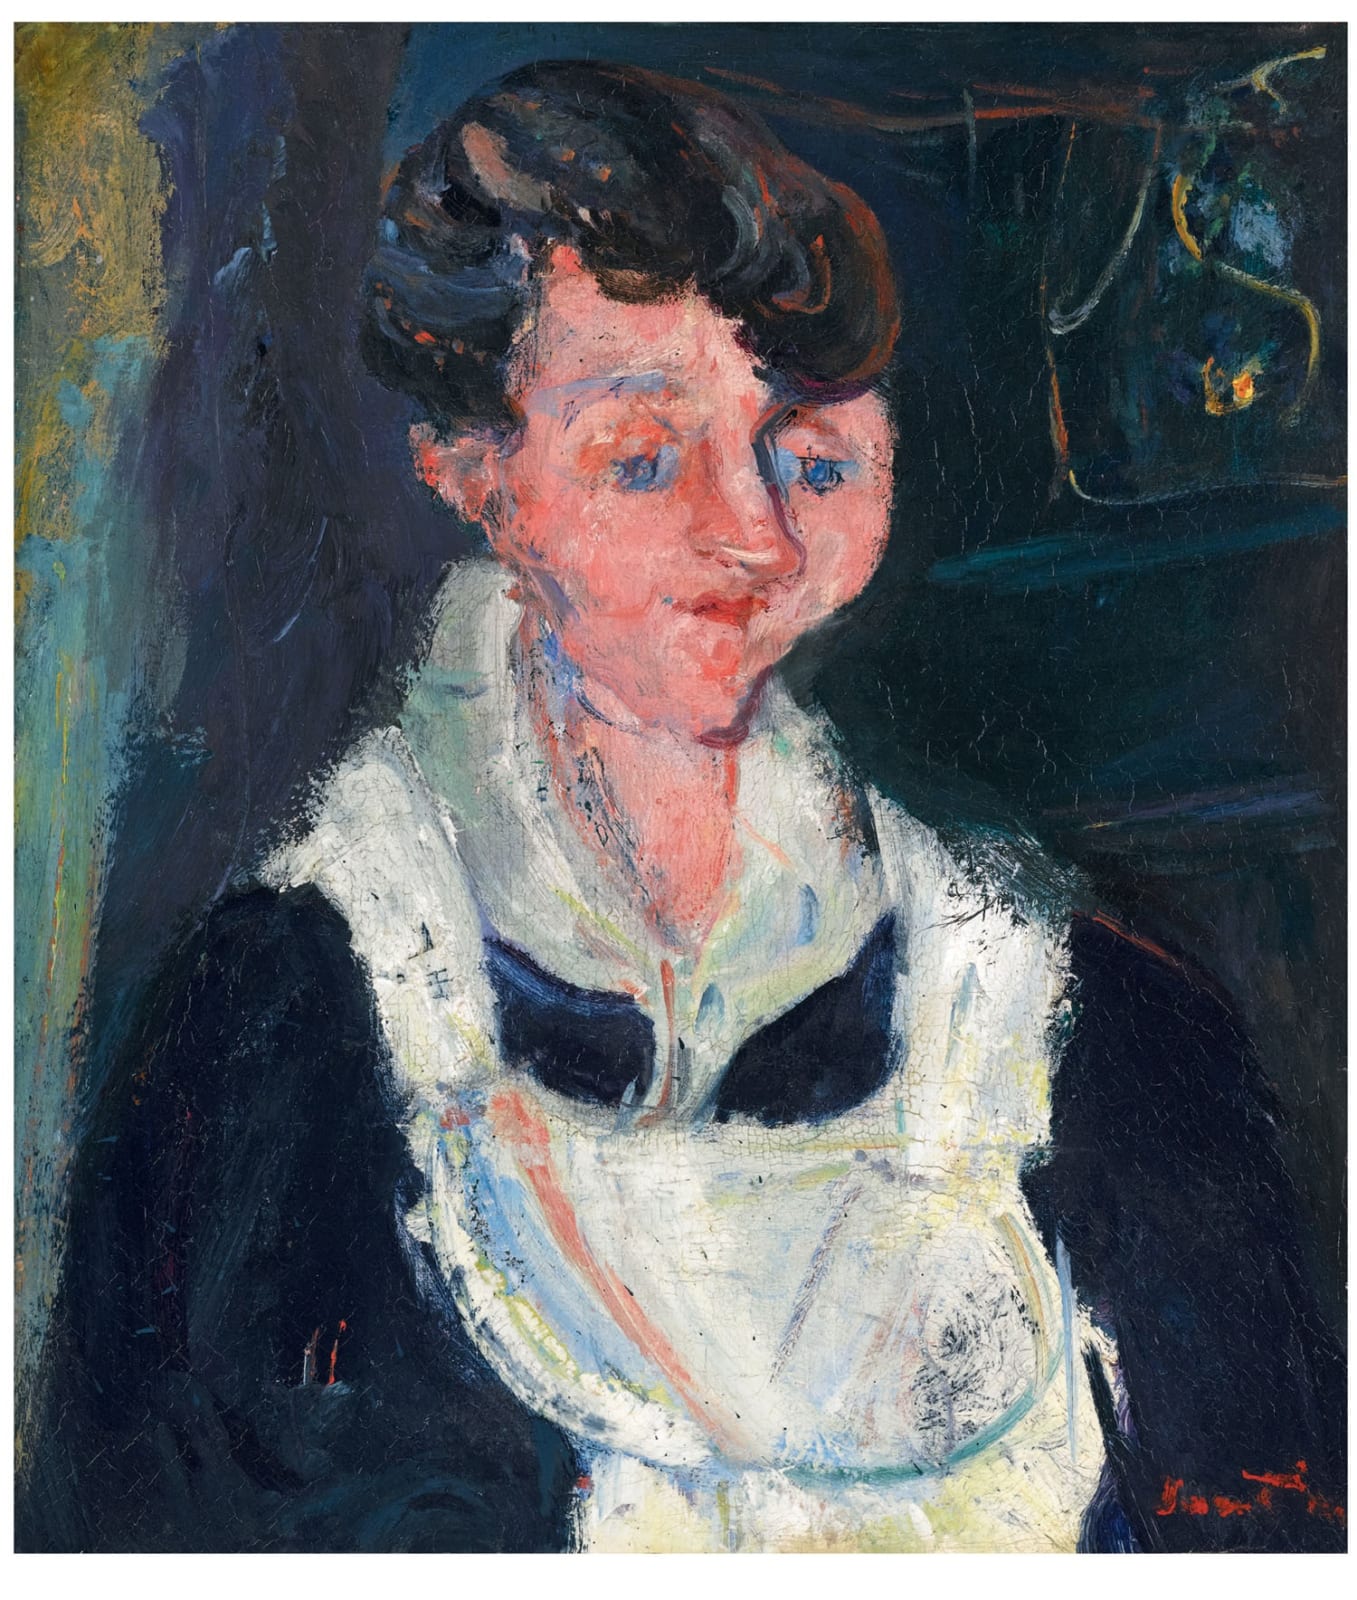 Chaïm Soutine (1893-1943) Jeune Servante (Waiting Maid, also known as La Soubrette) c.1933 Oil on canvas 46.5 x 40.5 cm Ben Uri Collection To see and discover more about this artist click here